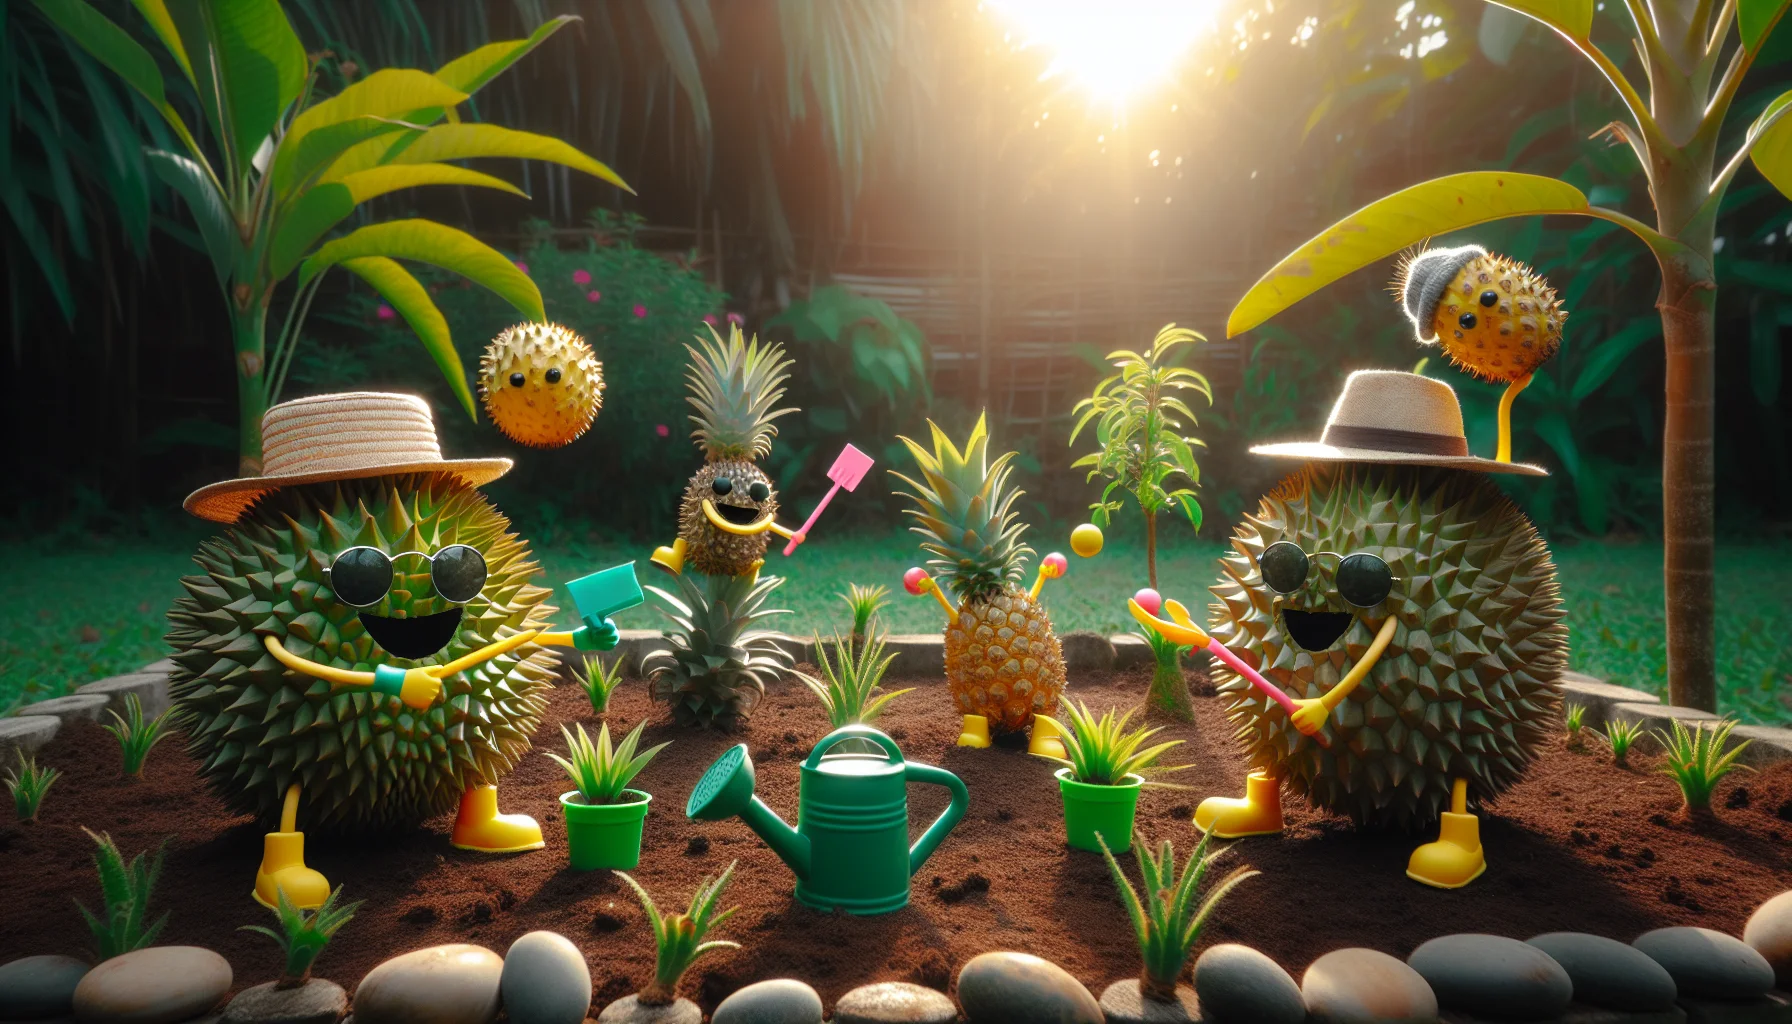 Create a light-hearted, humorous portrayal of spiky fruits in a garden setting to encourage a love for gardening. It features different spiky fruits like durians and pineapples engaged in amusing actions, like durian playing catch with pineapple, both wearing wide-brimmed hats, sunglasses, and holding miniature watering cans. The fruits aren't anthropomorphized but are strategically placed in the scene to give an illusion of them doing funny activities. Around them, other plants flourish and thrive under the early morning sunlight. This lively, sunny garden emits a sense of joy and fun, promoting the pleasures of gardening.